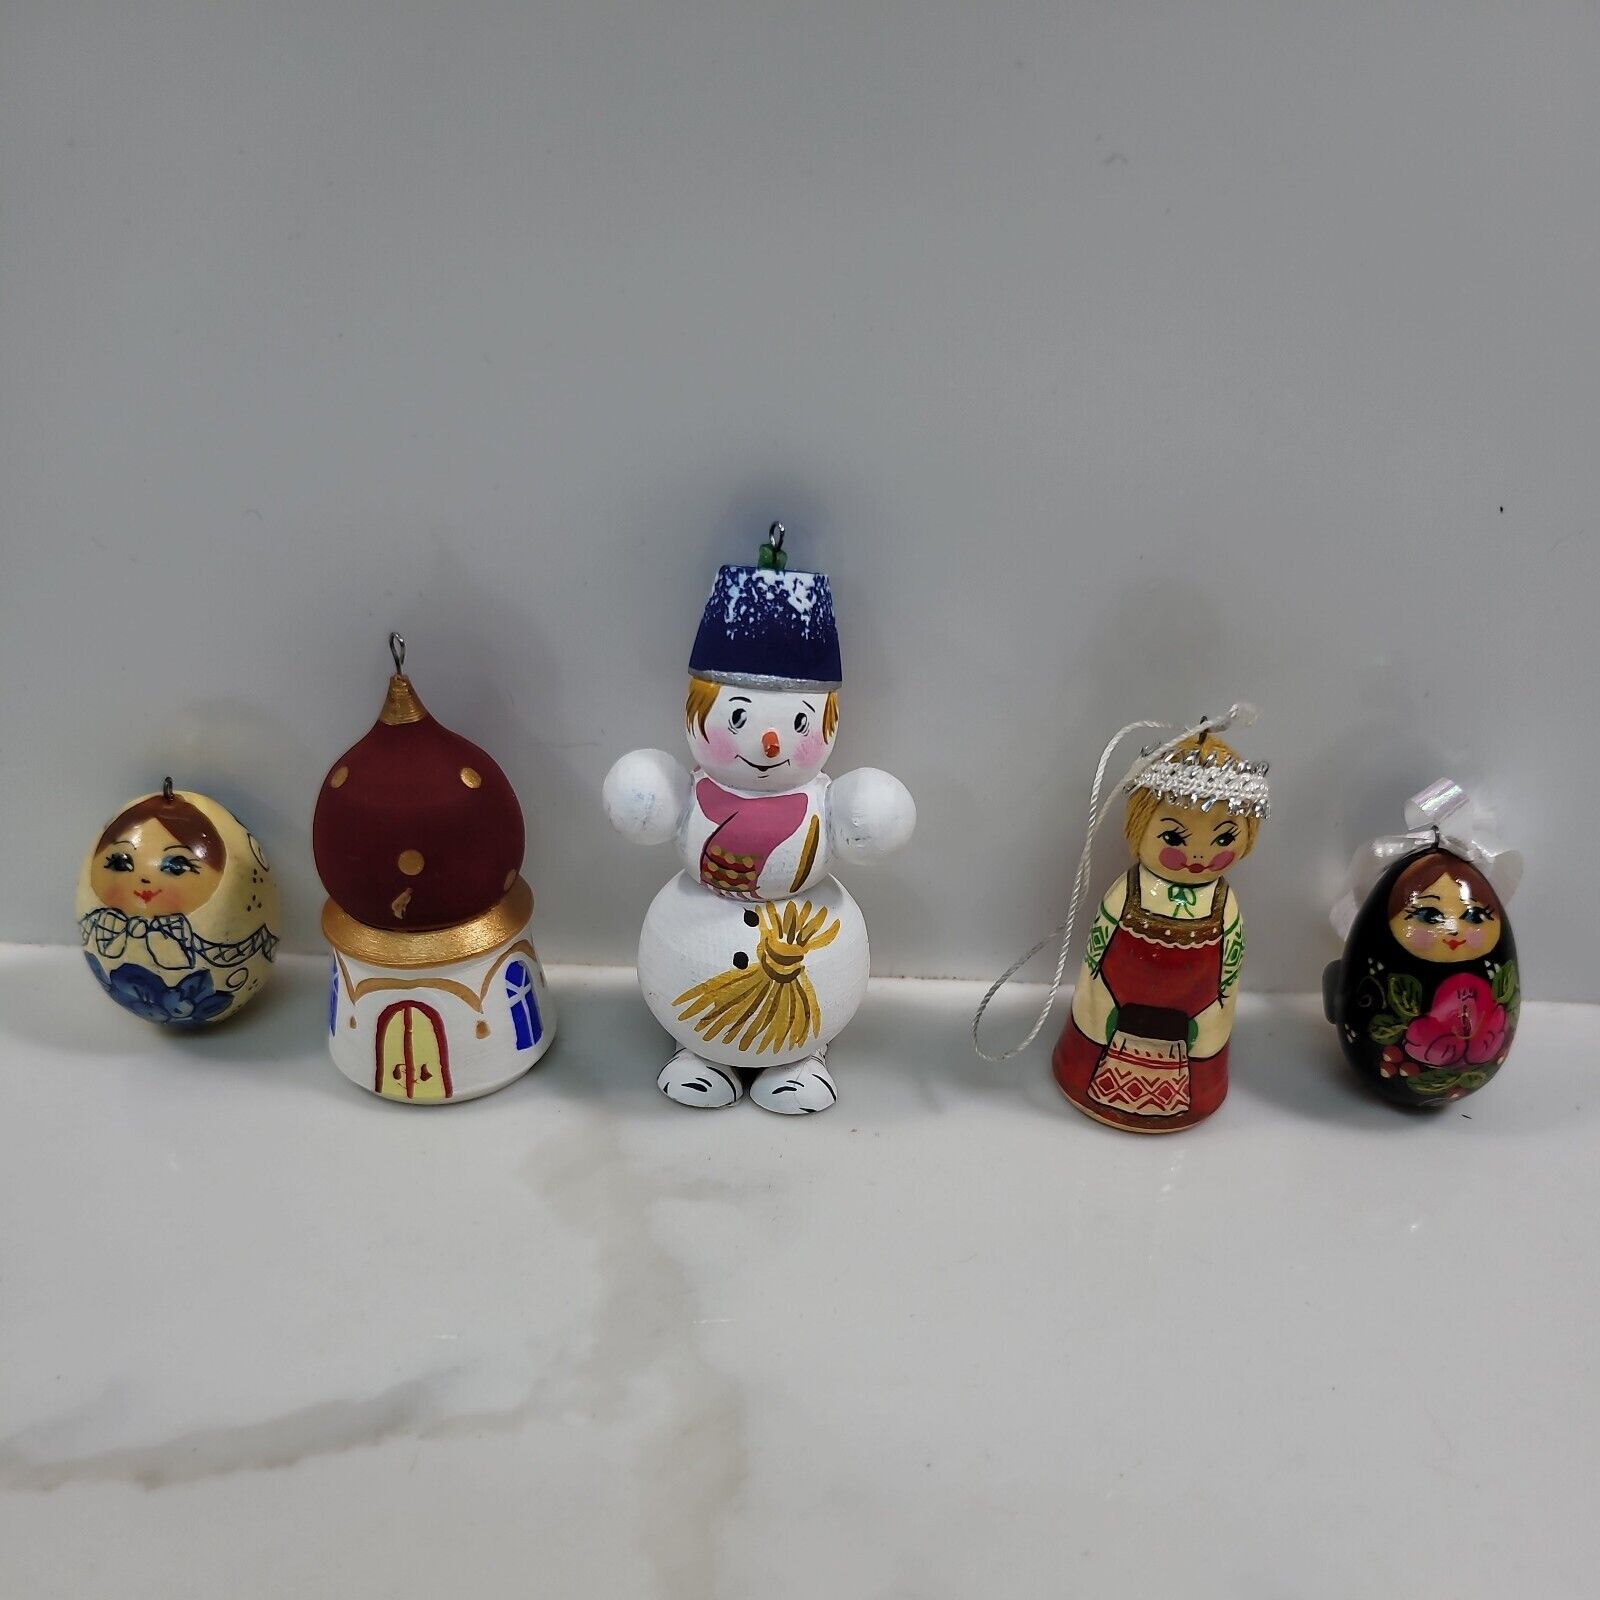 Vintage Wooden Russian Doll Figurines Christmas Ornaments Decorations (Lot of 5)